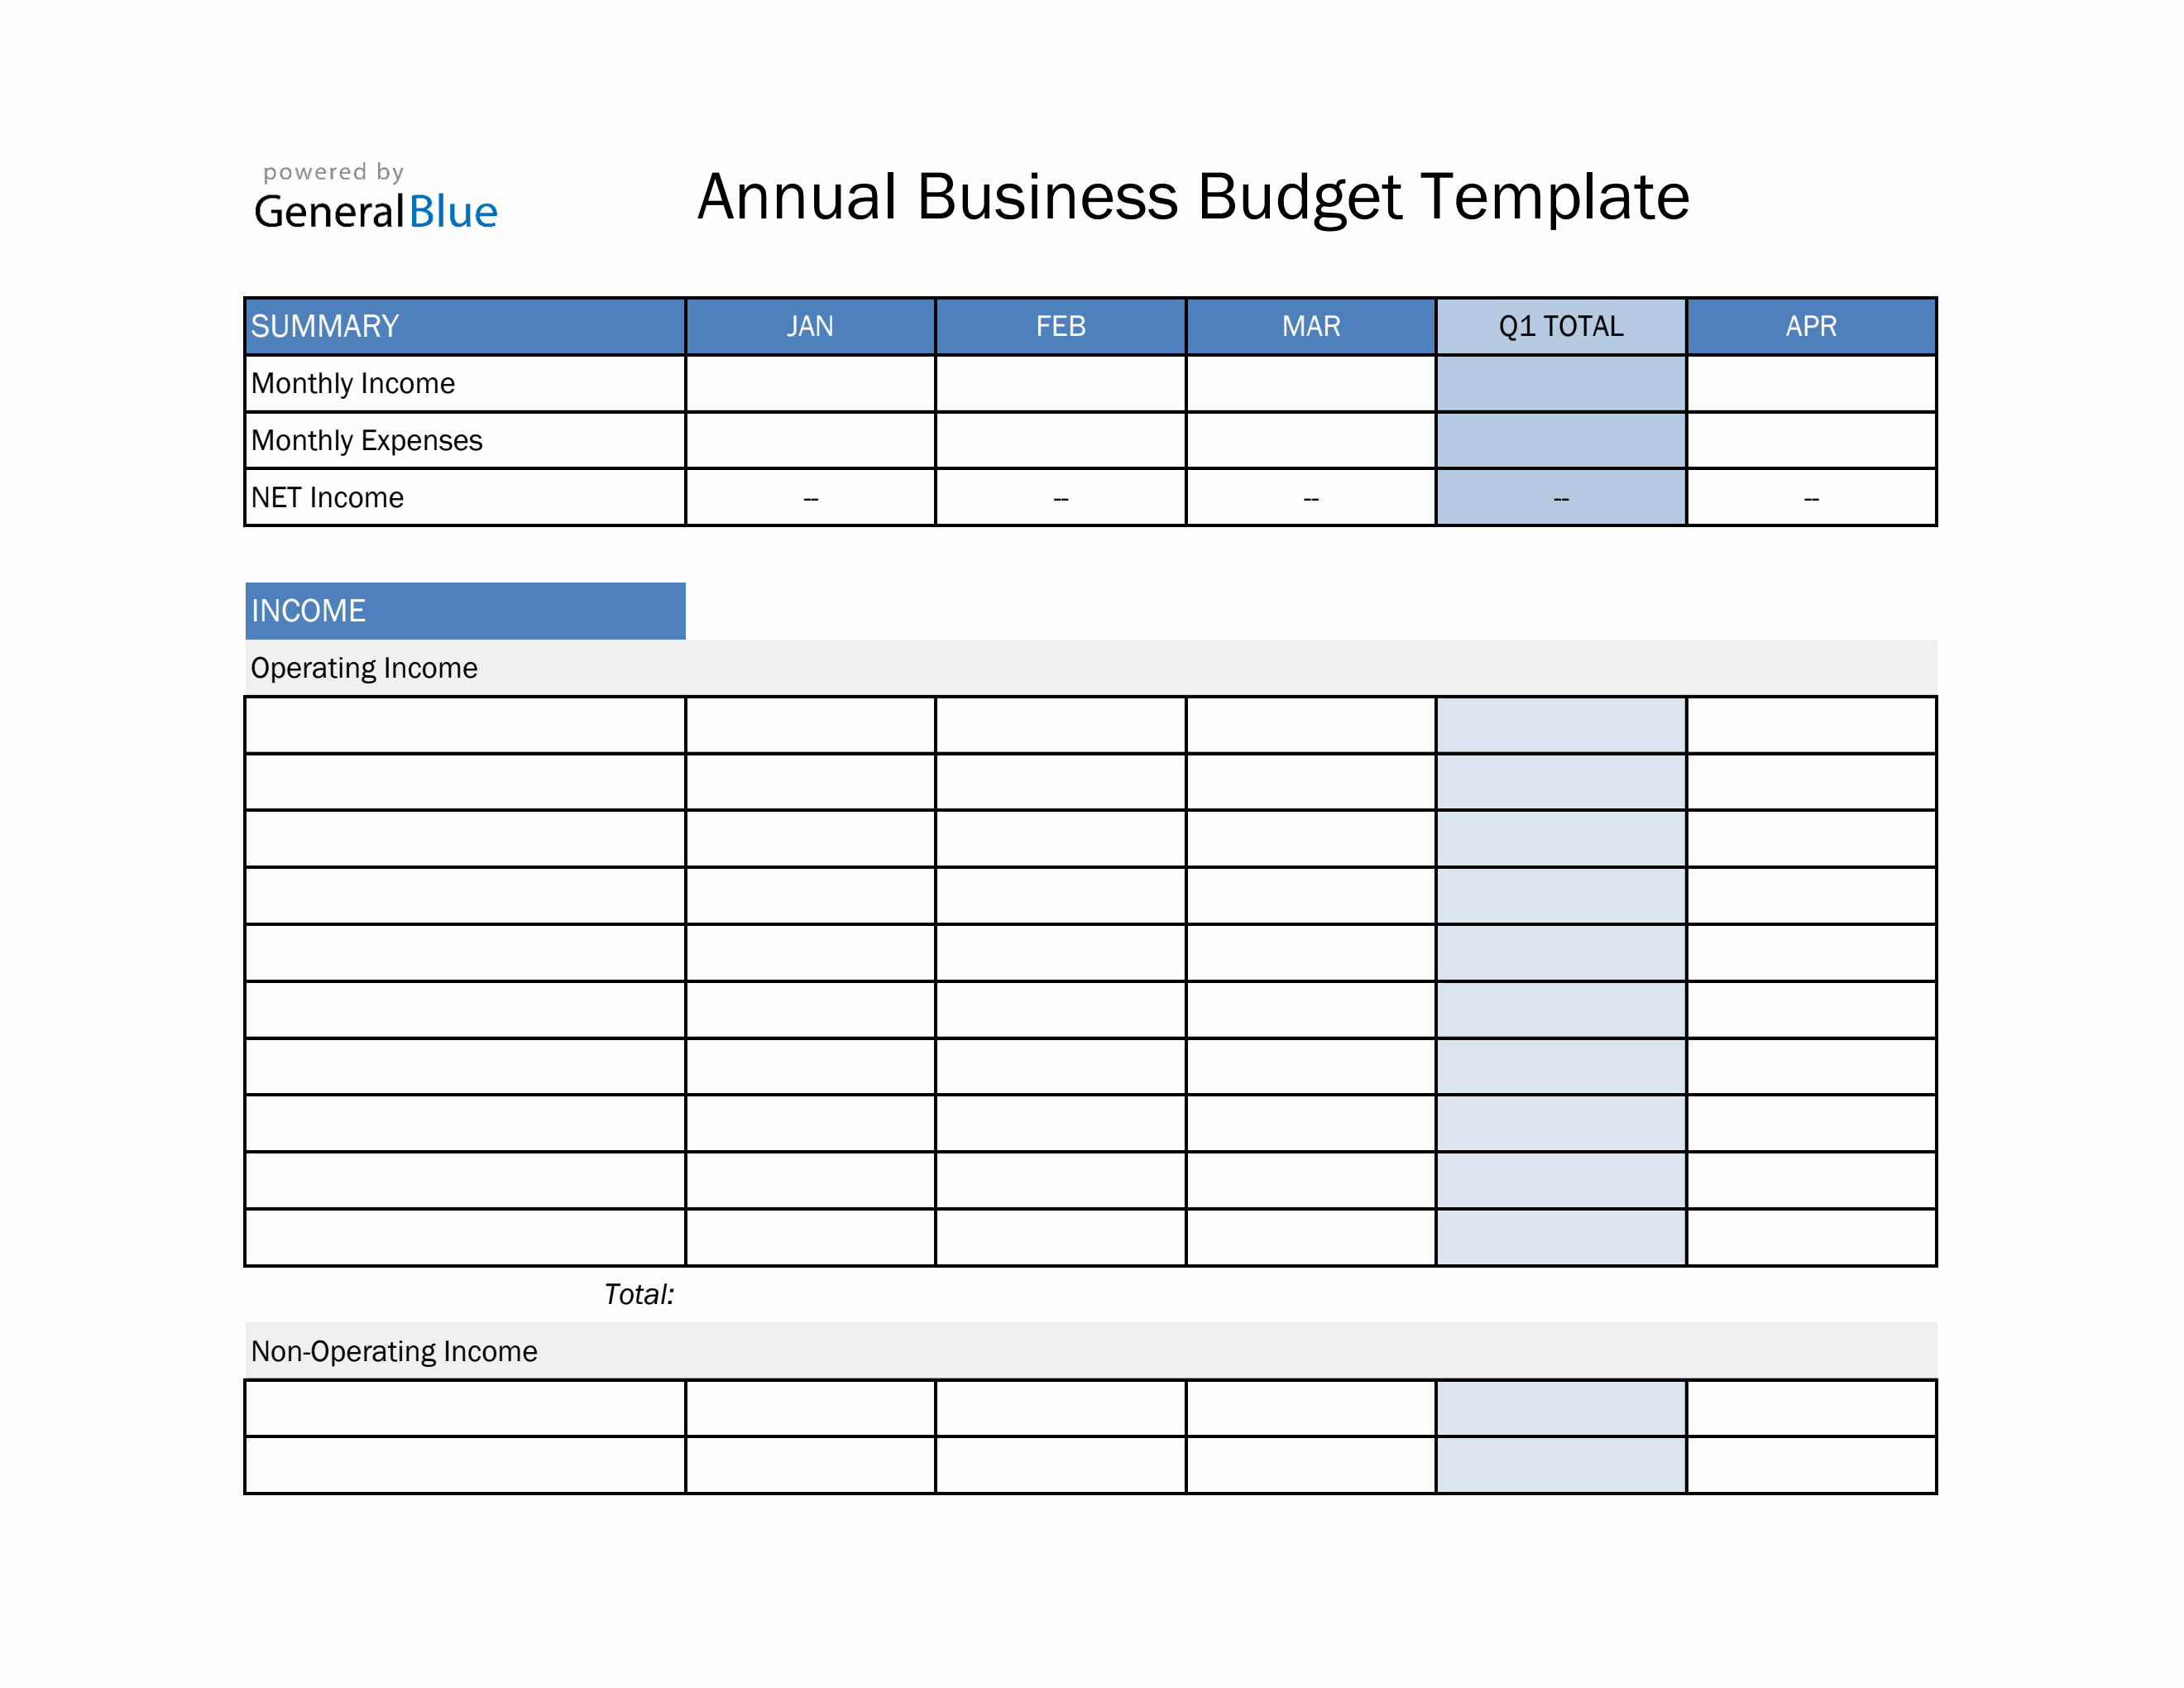 Annual Business Budget Template in Excel Within Annual Business Budget Template Excel